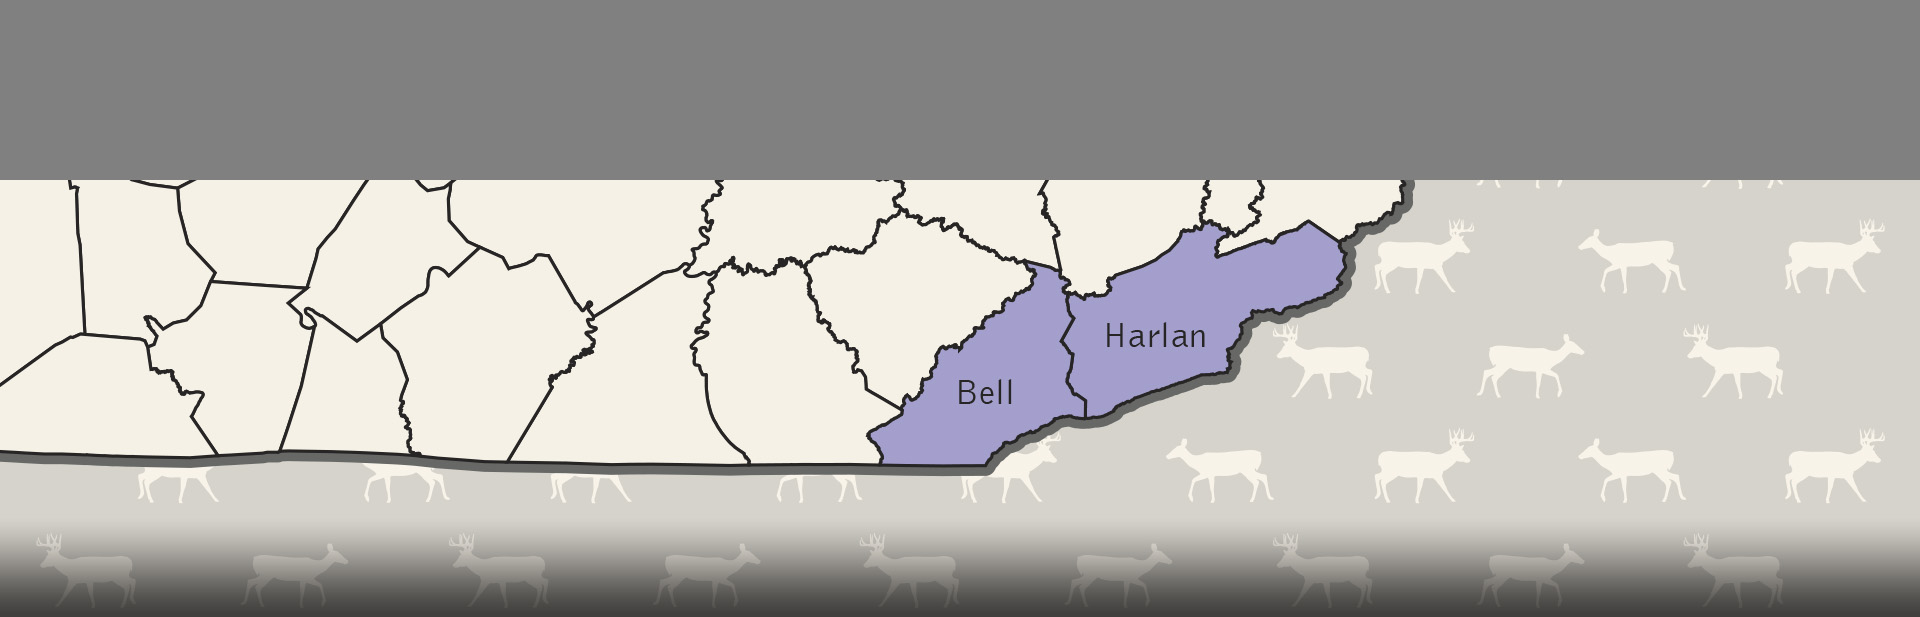 CWD Southeastern Counties